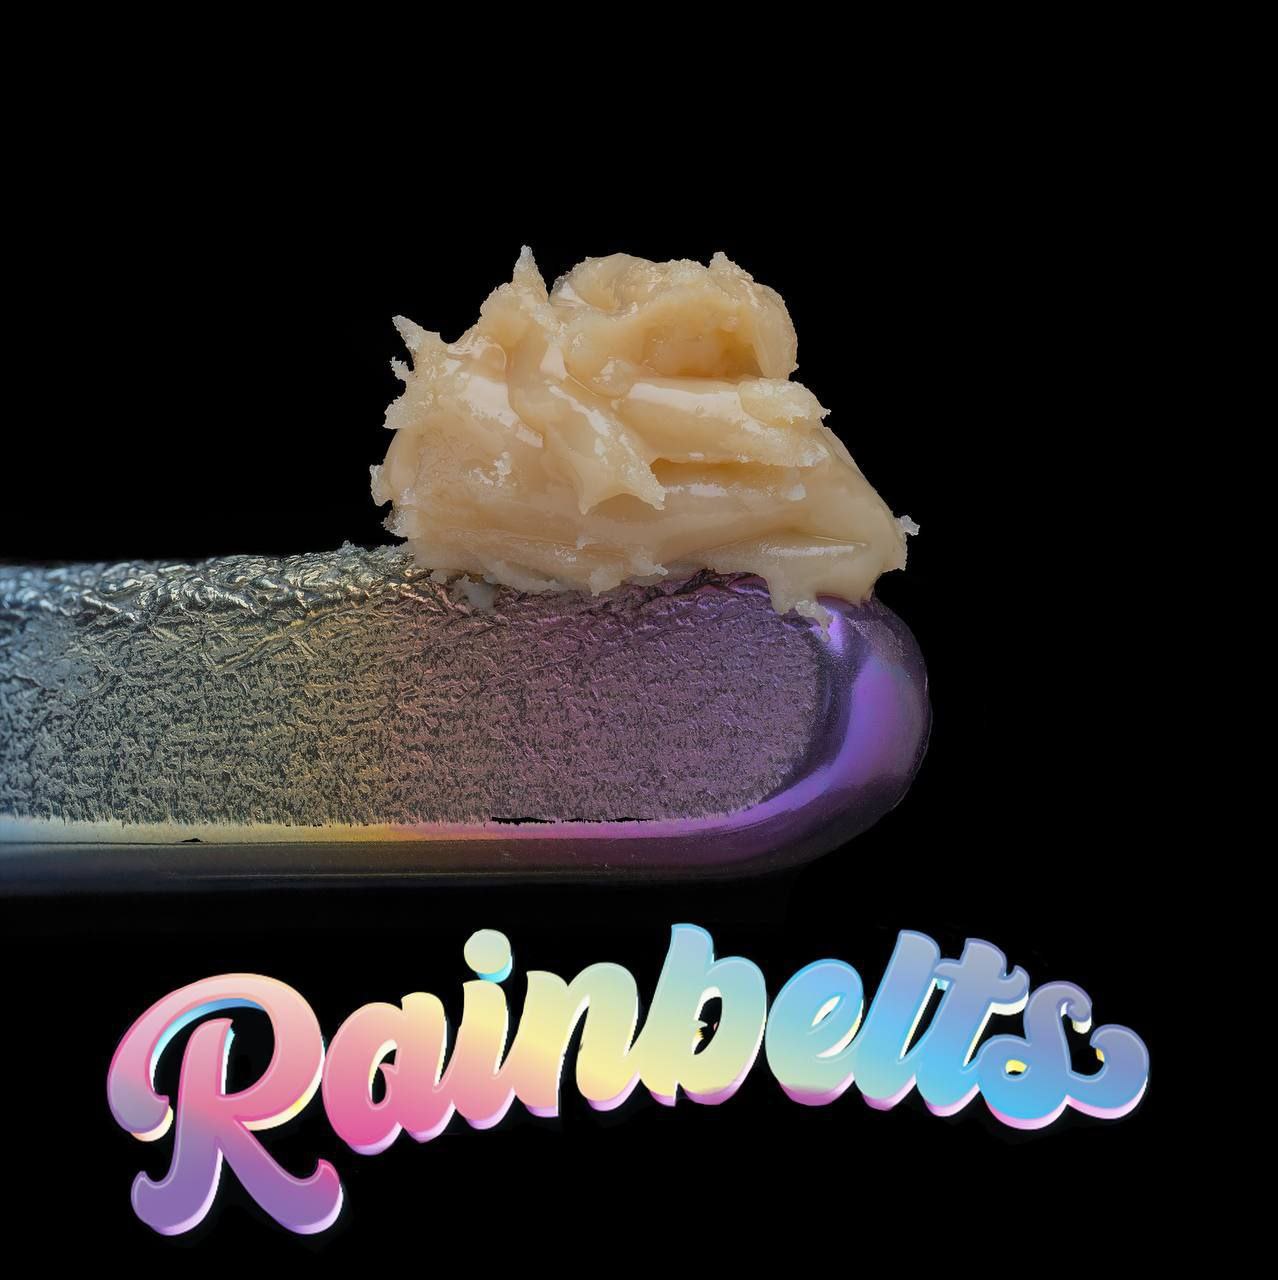 A metallic-colored tool with a textured finish holds a small, creamy substance. The words "Import placeholder for 32" are displayed at the bottom of the image in rainbow gradient text. The background is solid black.